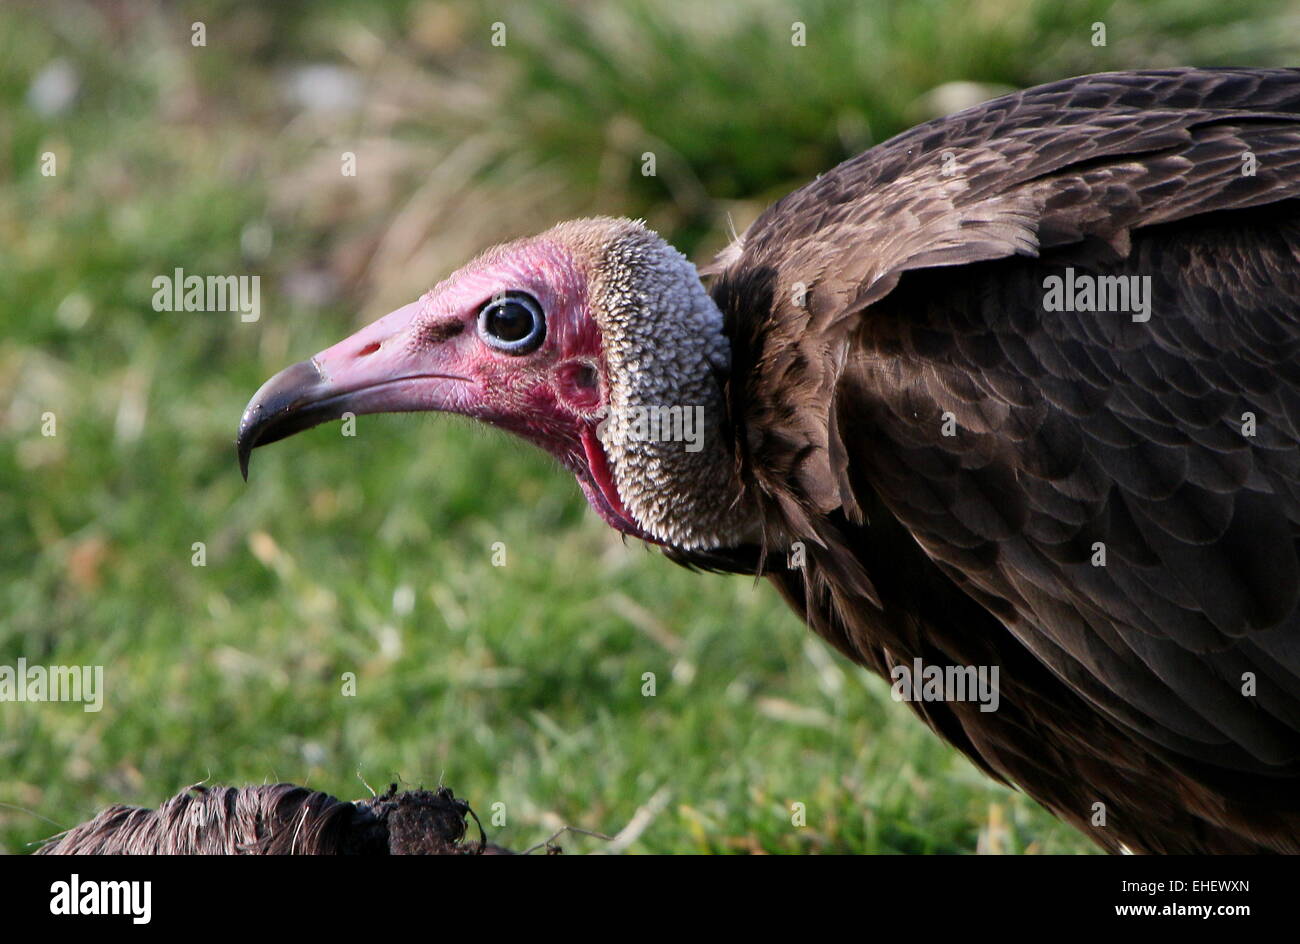 African Hooded vulture (Necrosyrtes monachus) feeding on a carcass Stock Photo